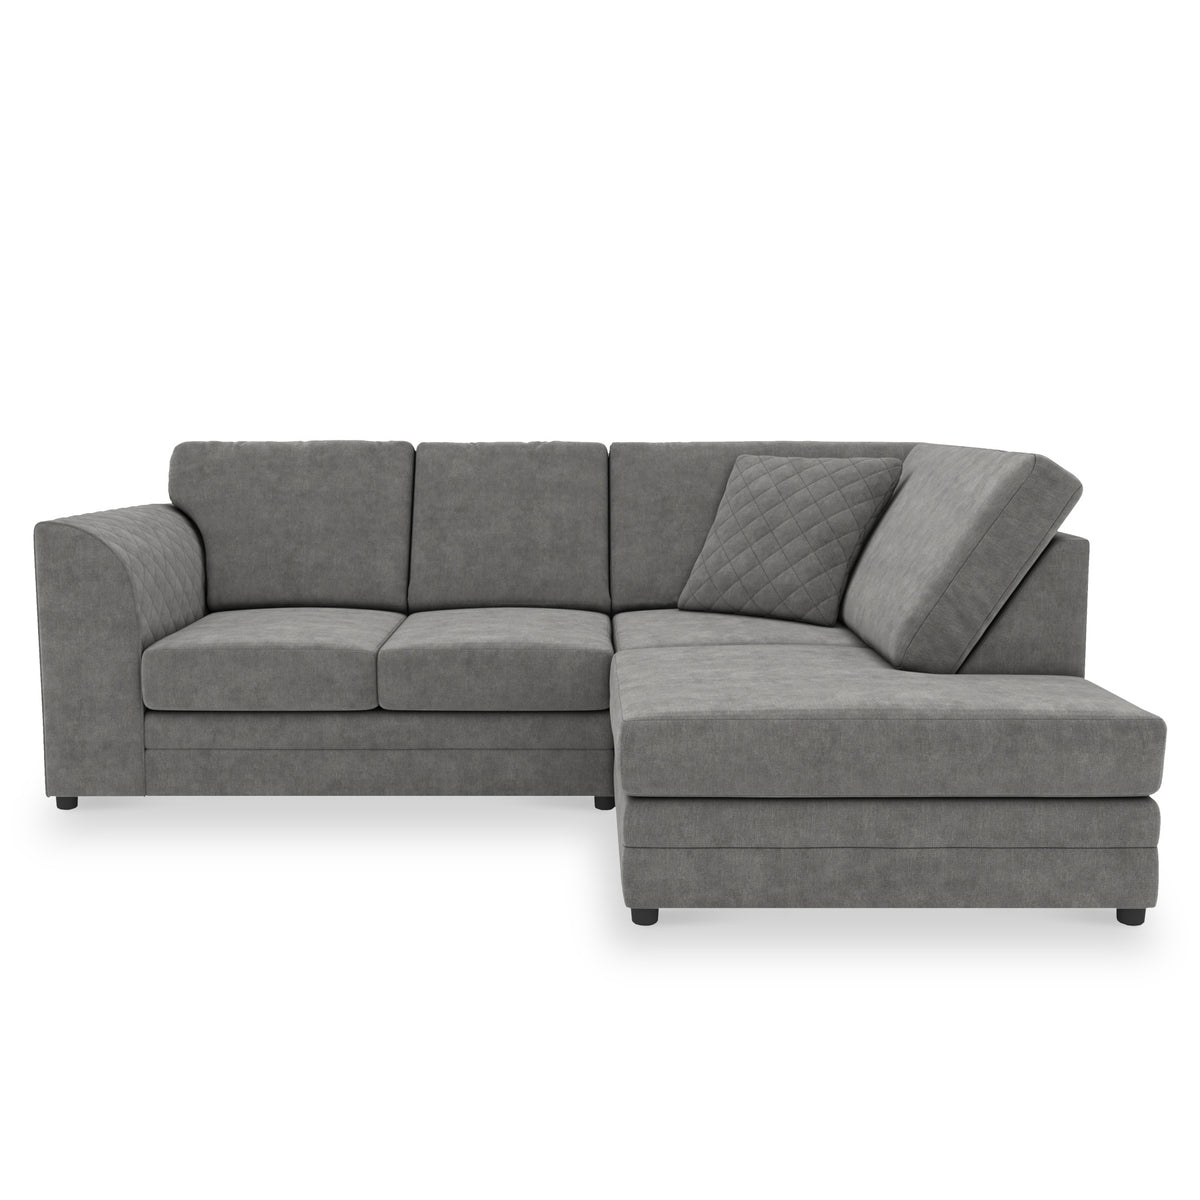 Seymour Charcoal Right Hand Corner couch